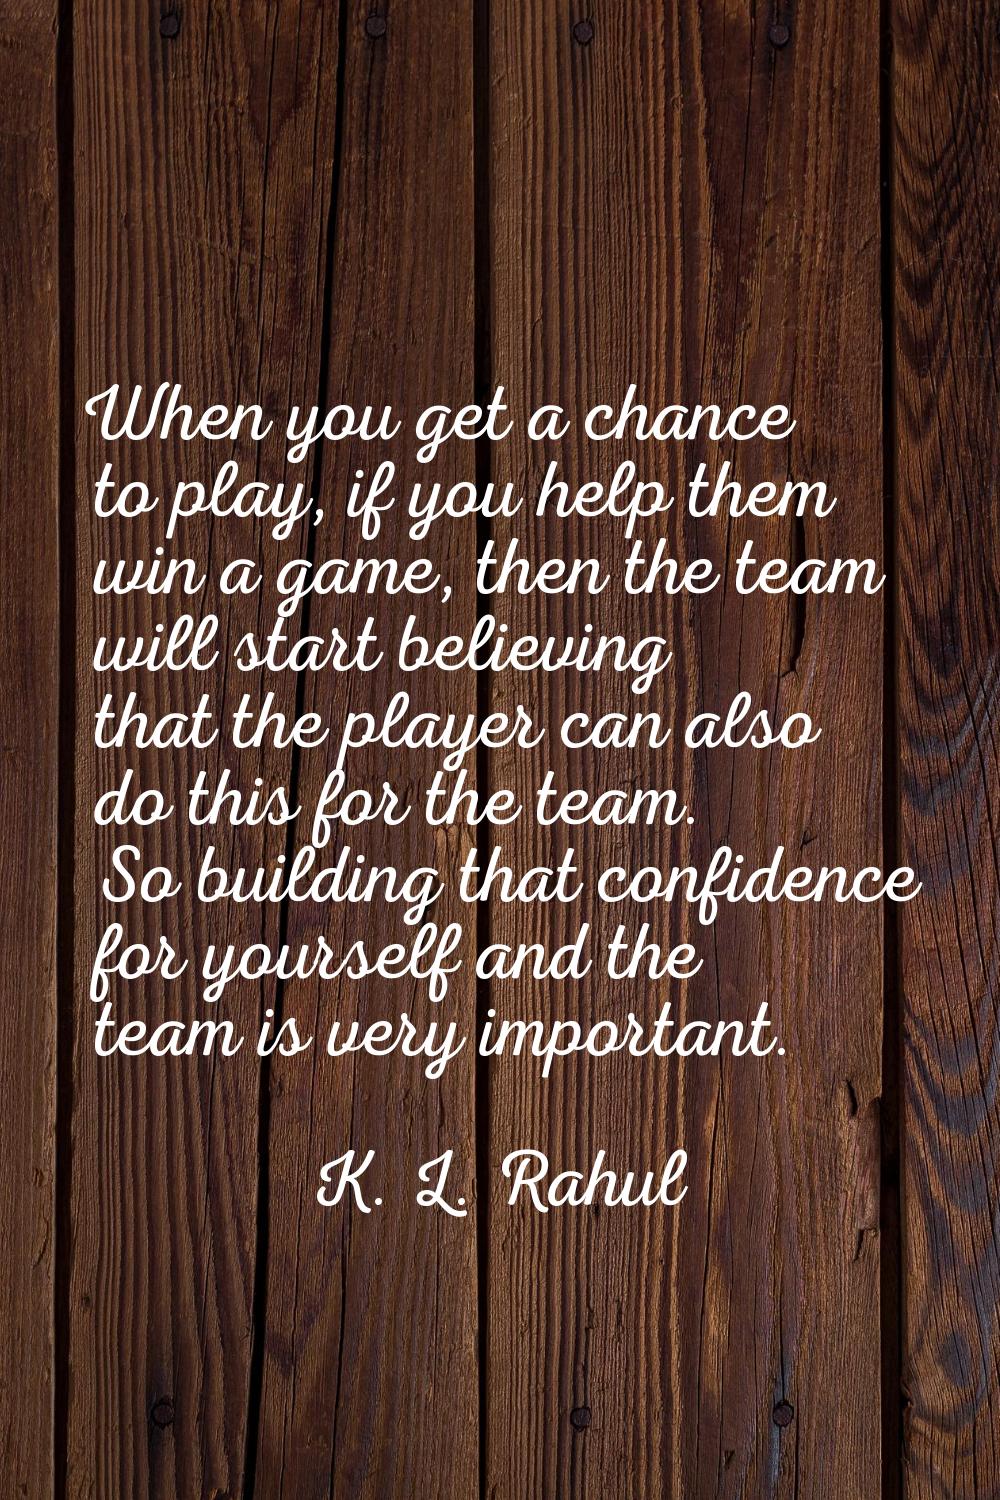 When you get a chance to play, if you help them win a game, then the team will start believing that